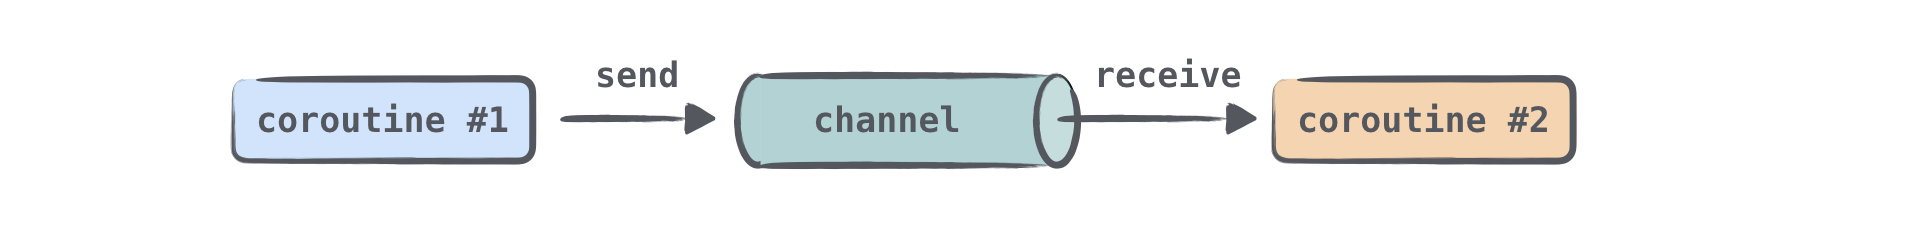 Using channels